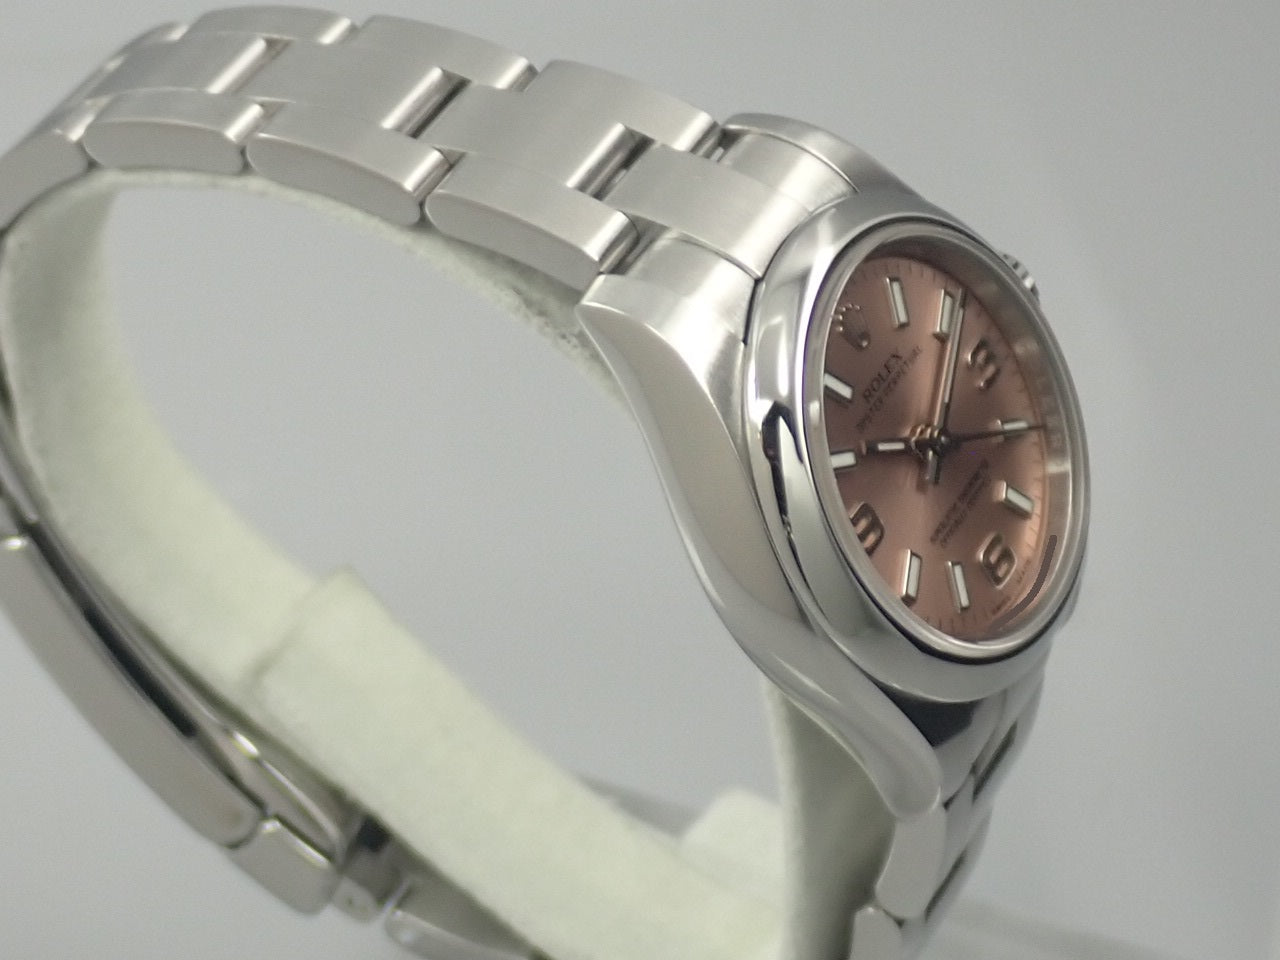 Rolex Oyster Perpetual 26 &lt;Others&gt;